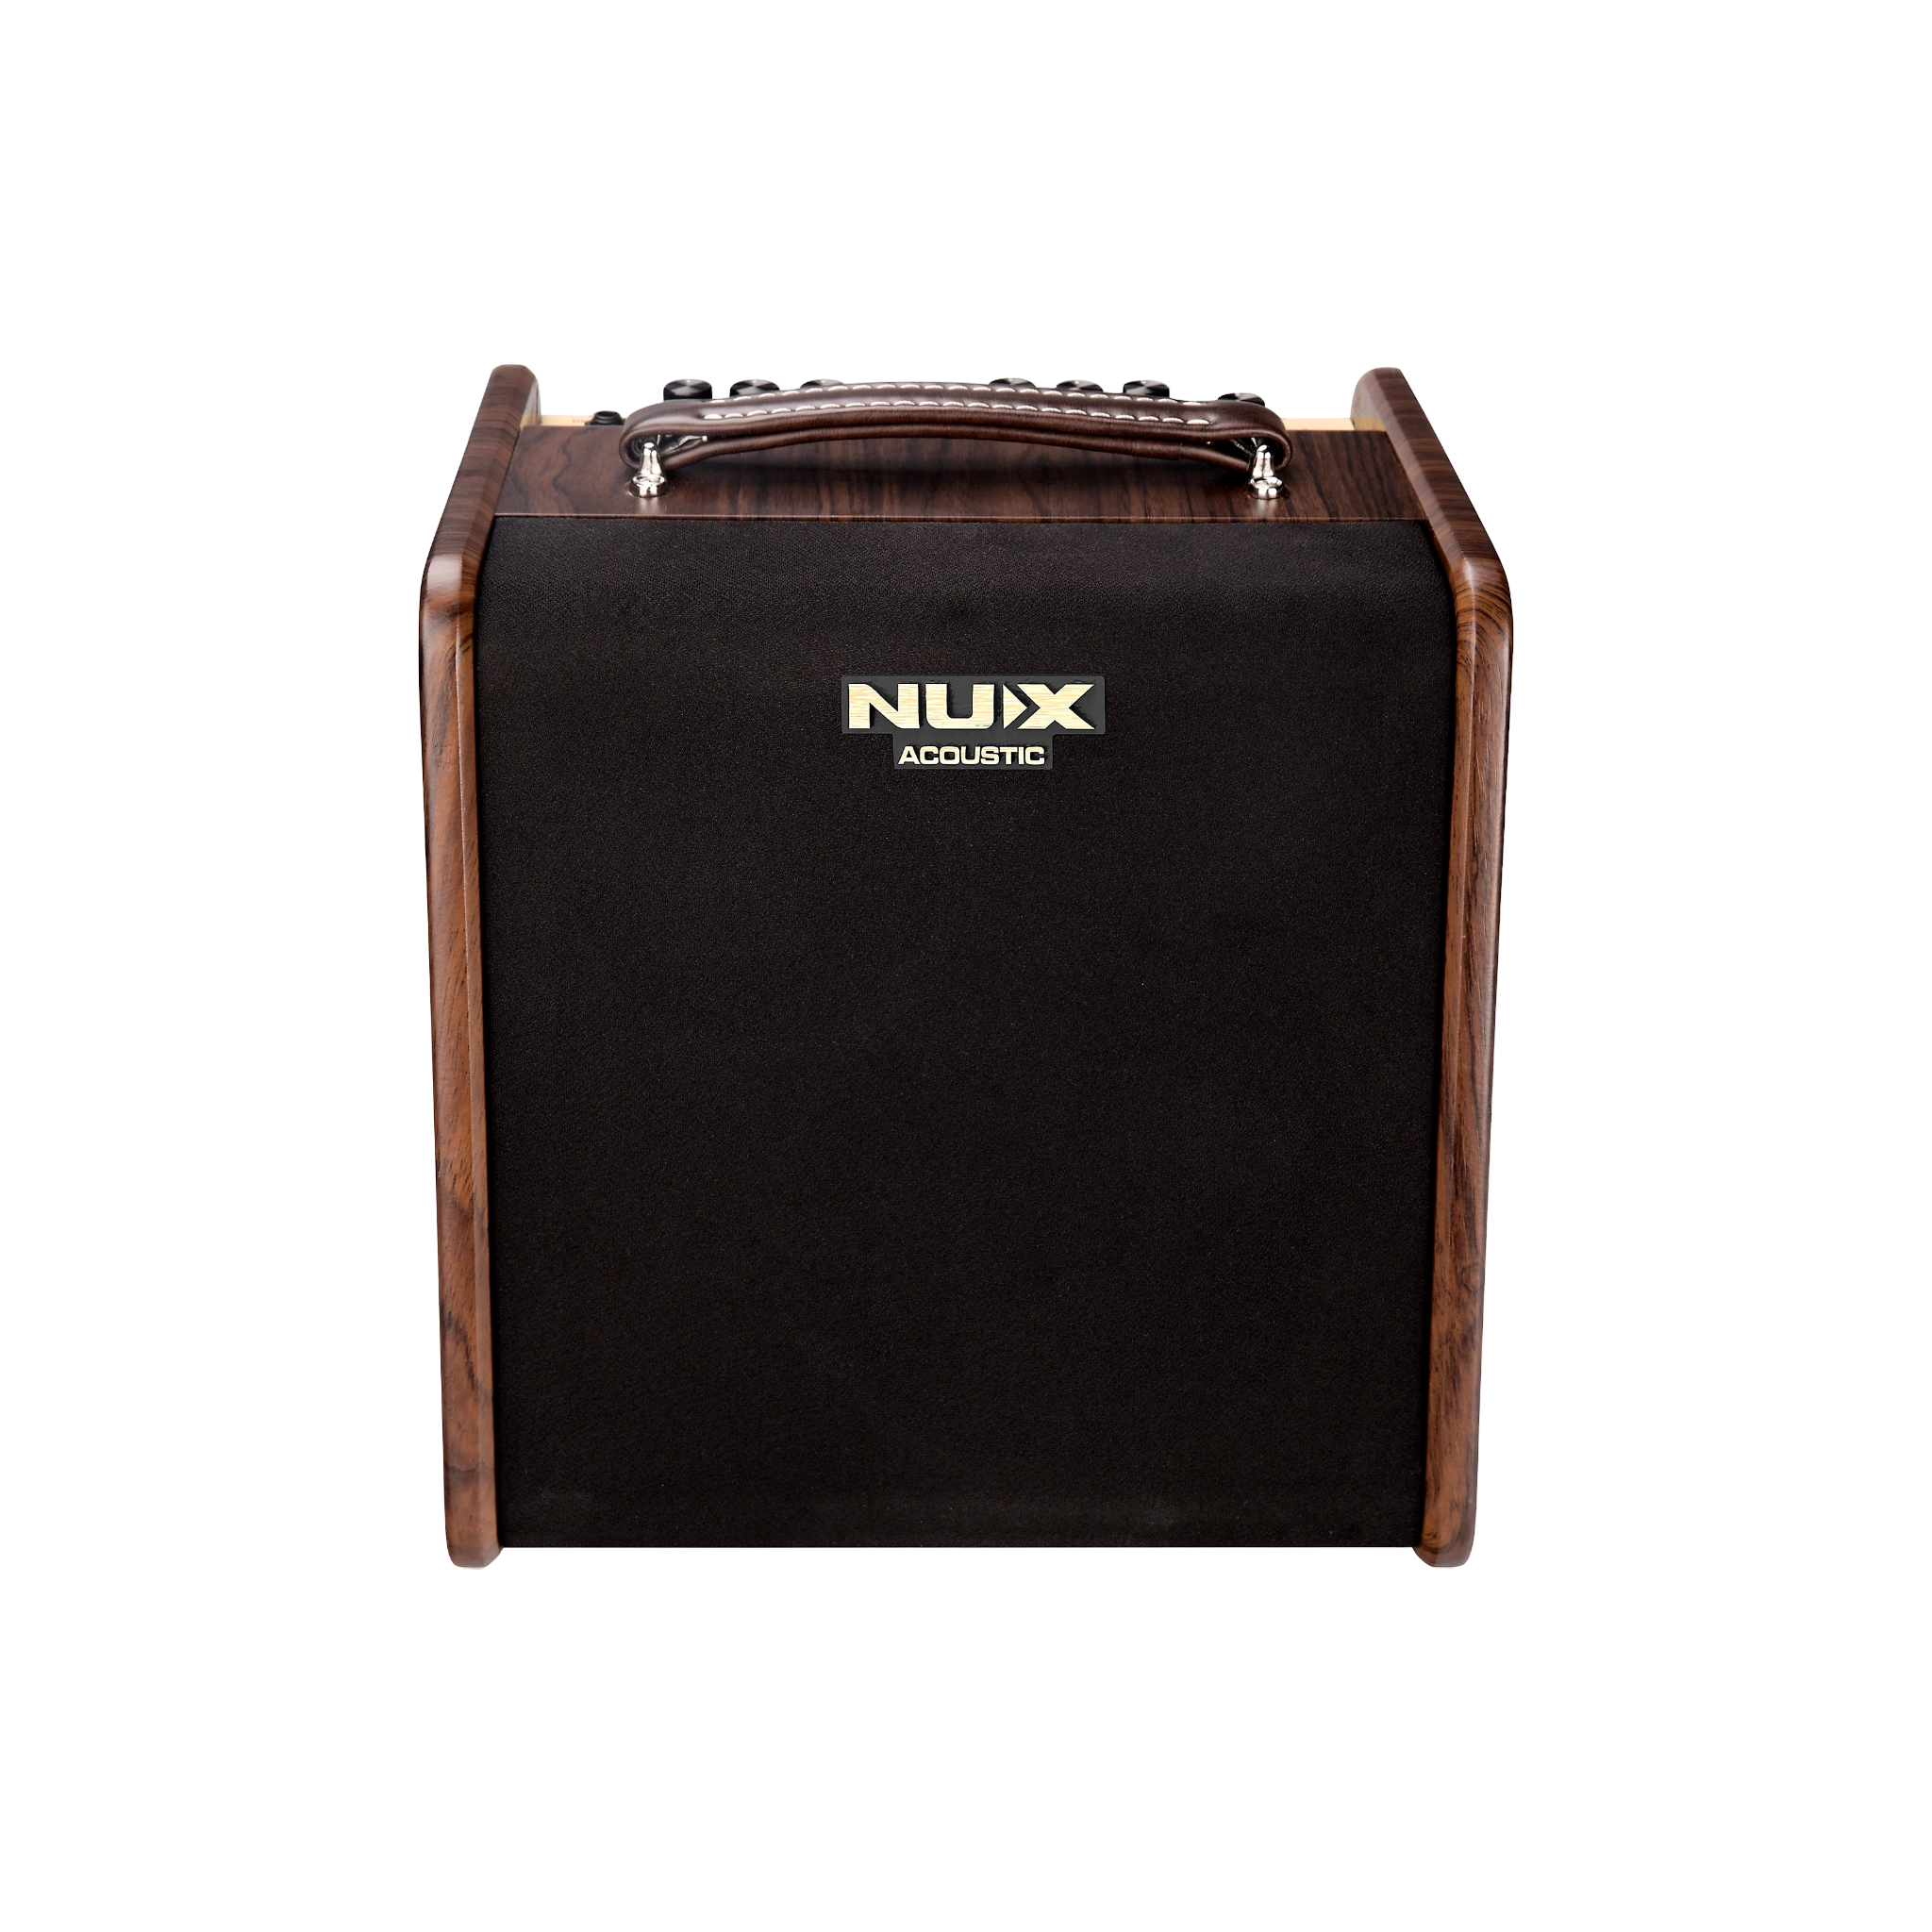 Nux NUX Stageman AC50 50W 1x6.5 Acoustic Combo Amp with Bluetooth Control Pedal